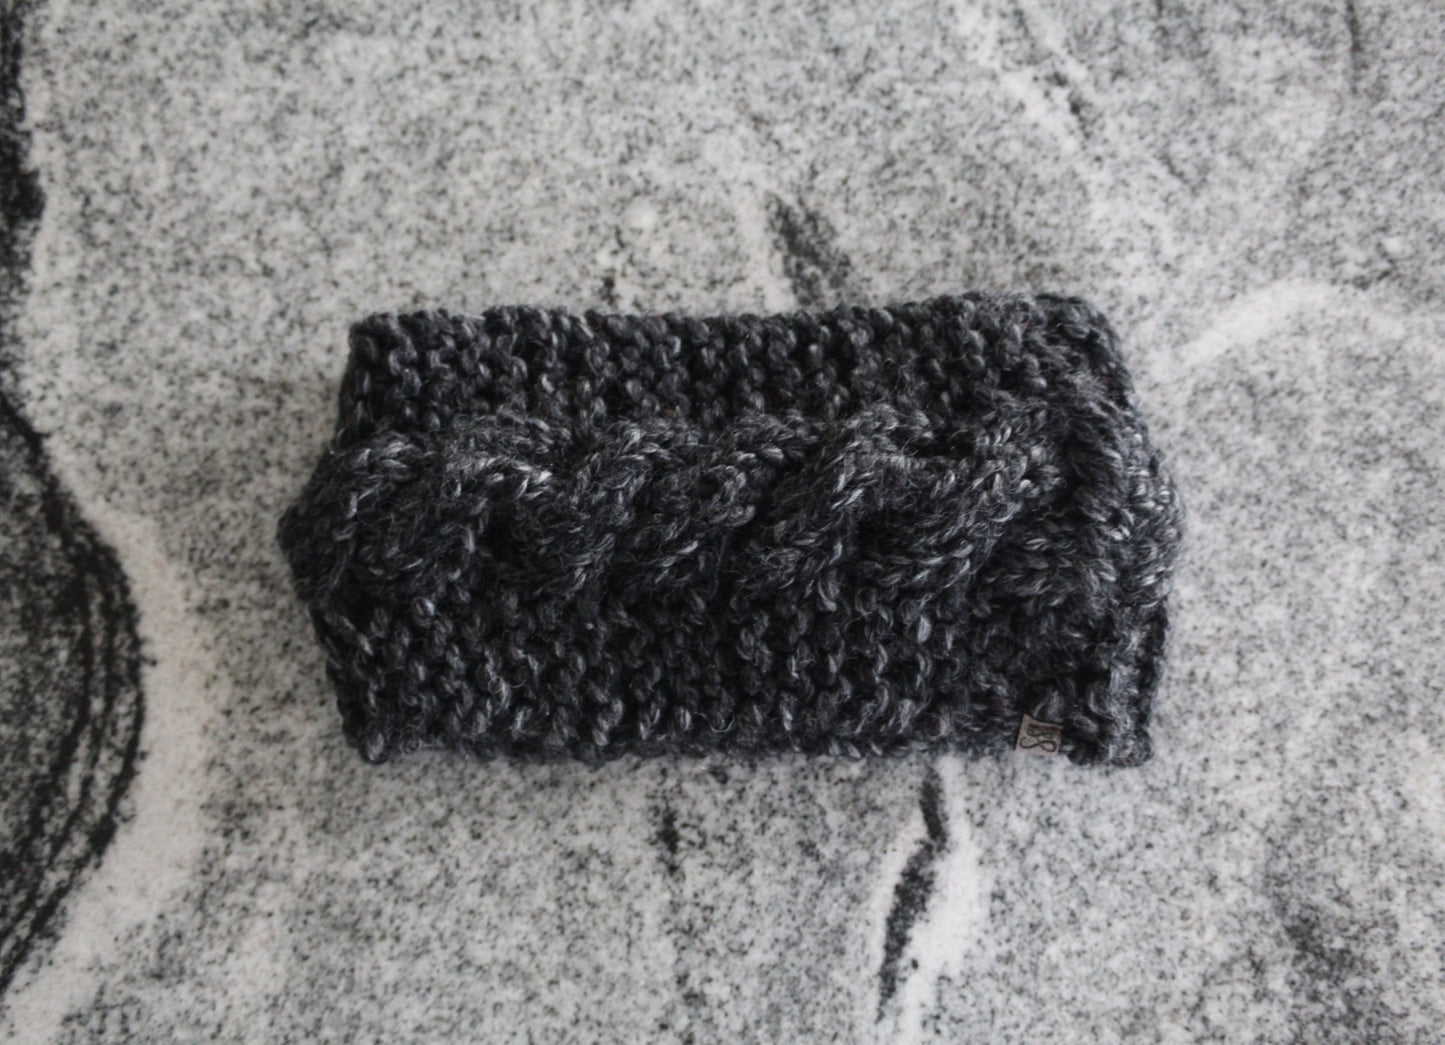 Cabled Ear Warmer in Charcoal Gray